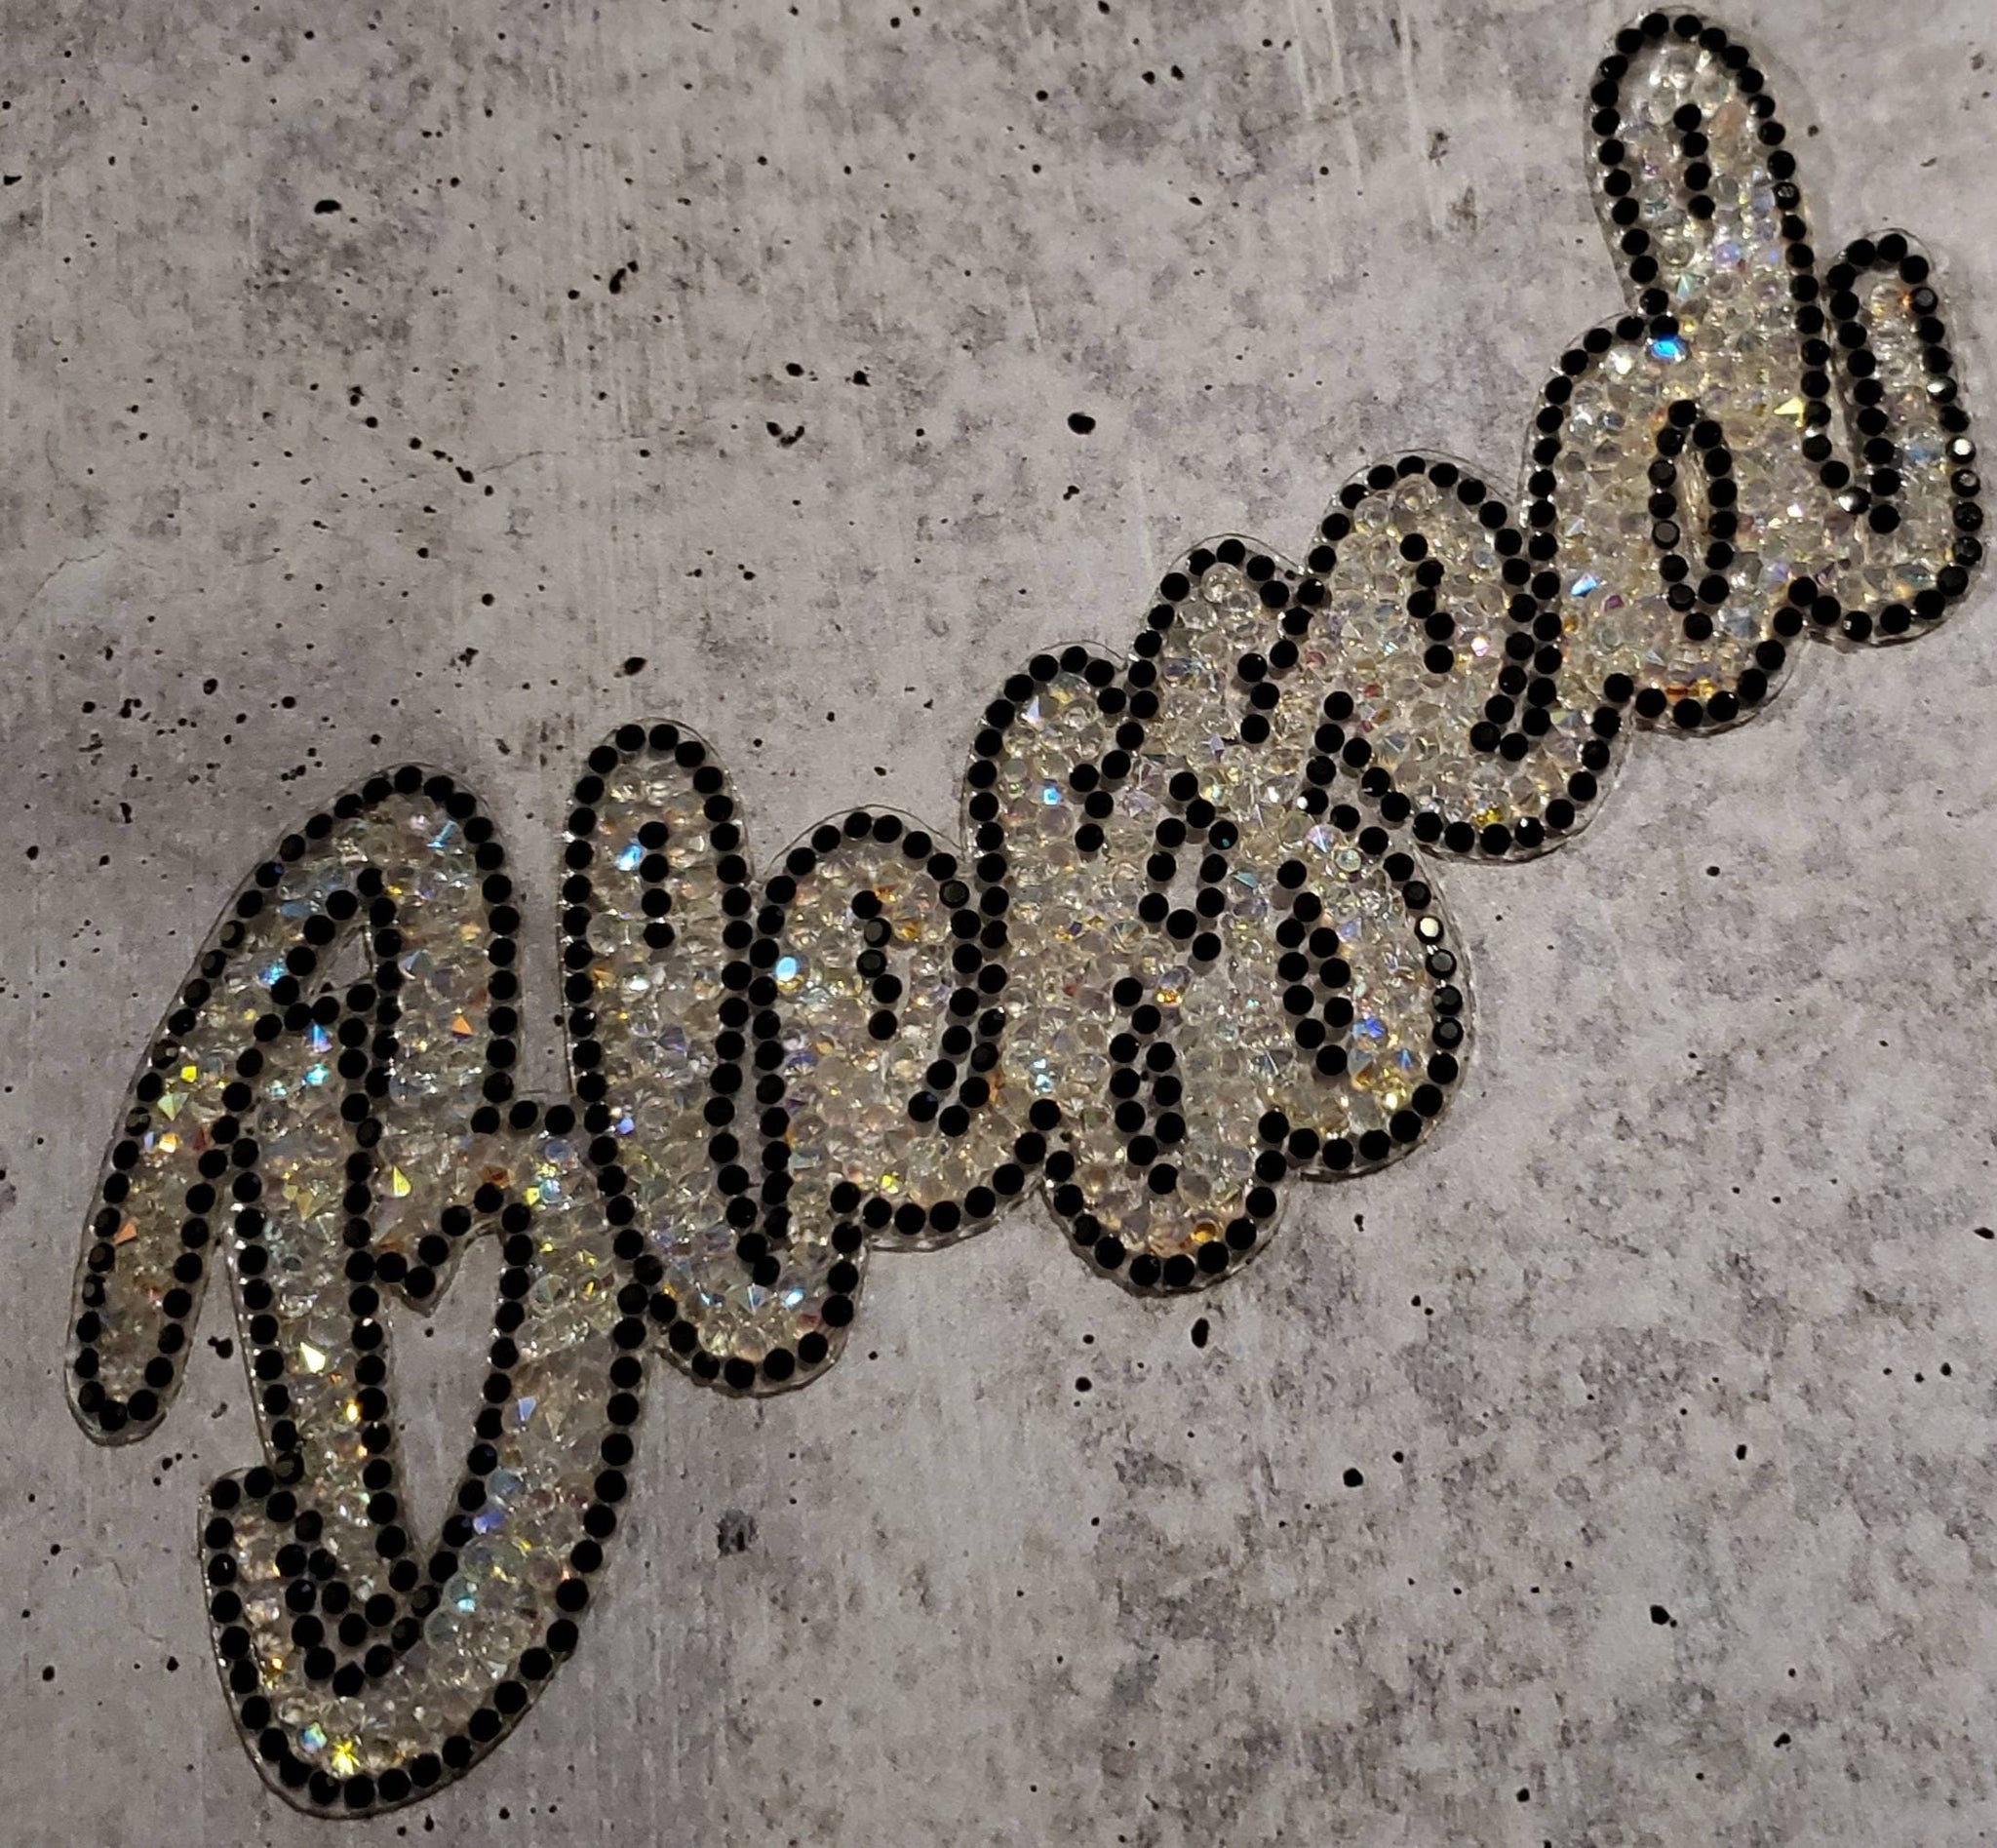 NEW Arrival, Blinged Out "Blessed" Rhinestone Patch with Adhesive, Rhinestone Applique, Size 6"x2.5", Czech Rhinestones, DIY Applique